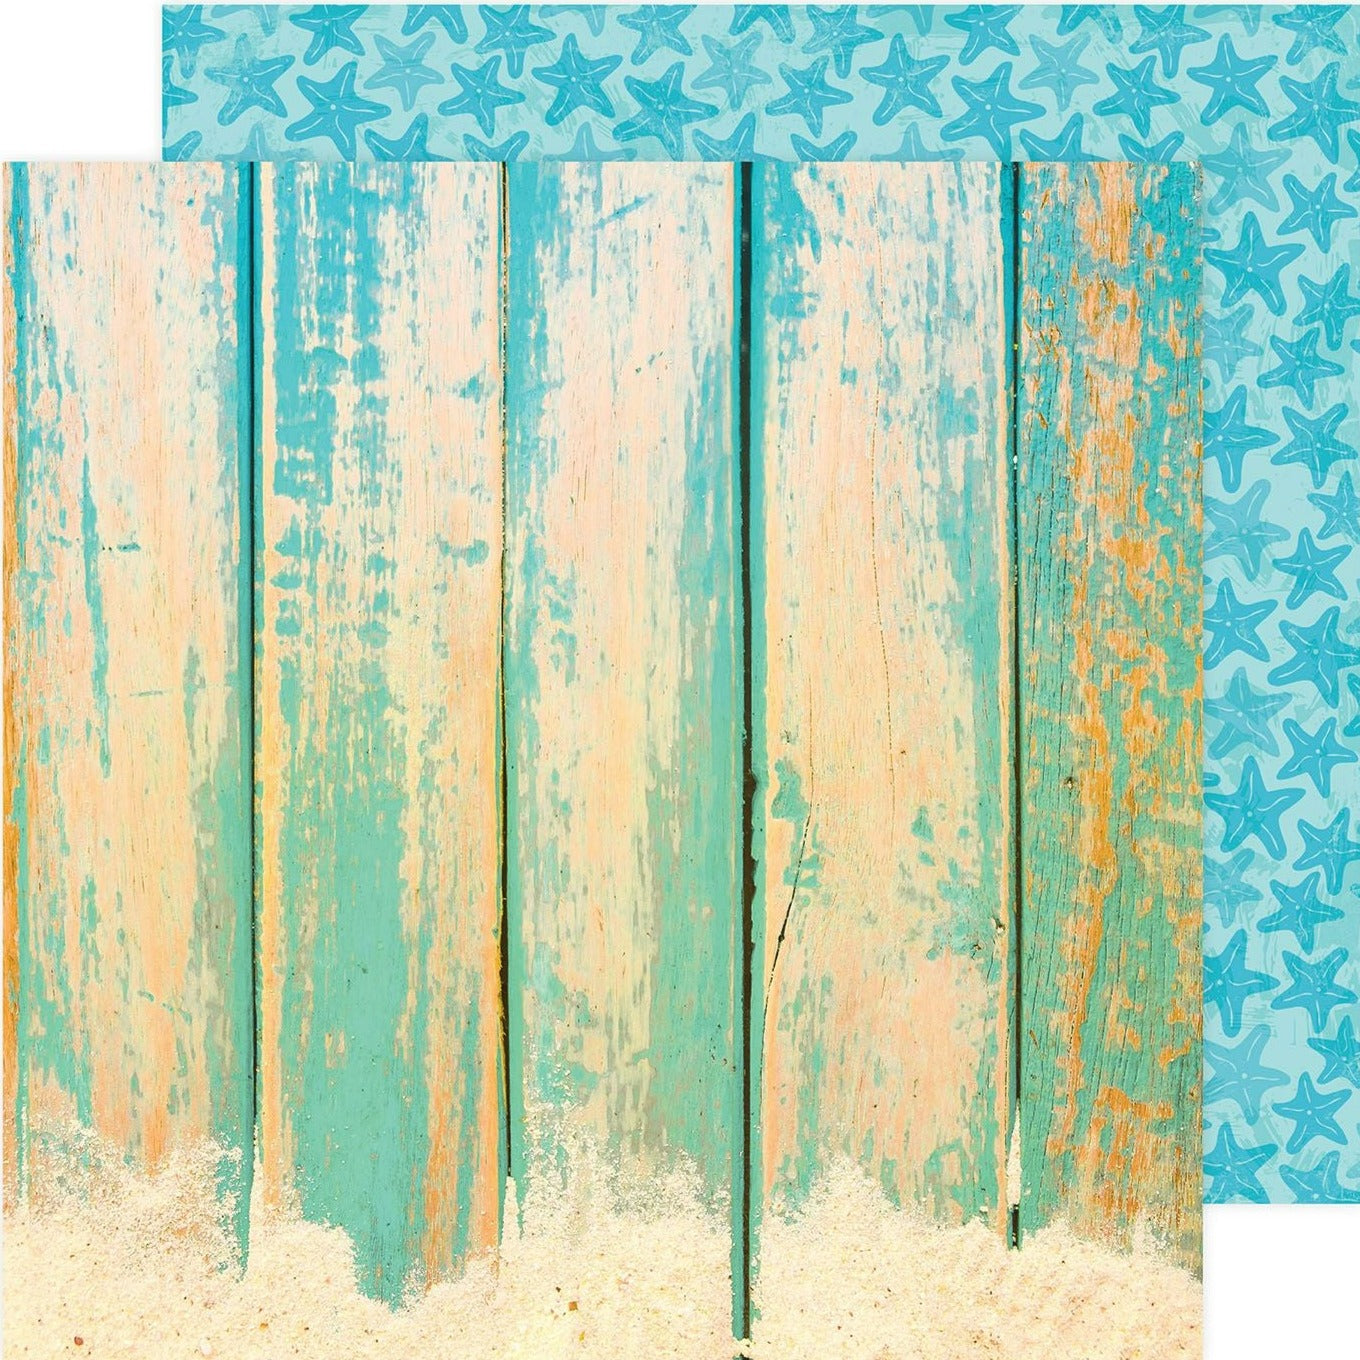 (turquoise distressed wood planks with hints of sand at the bottom - turquoise starfish pattern background reverse)